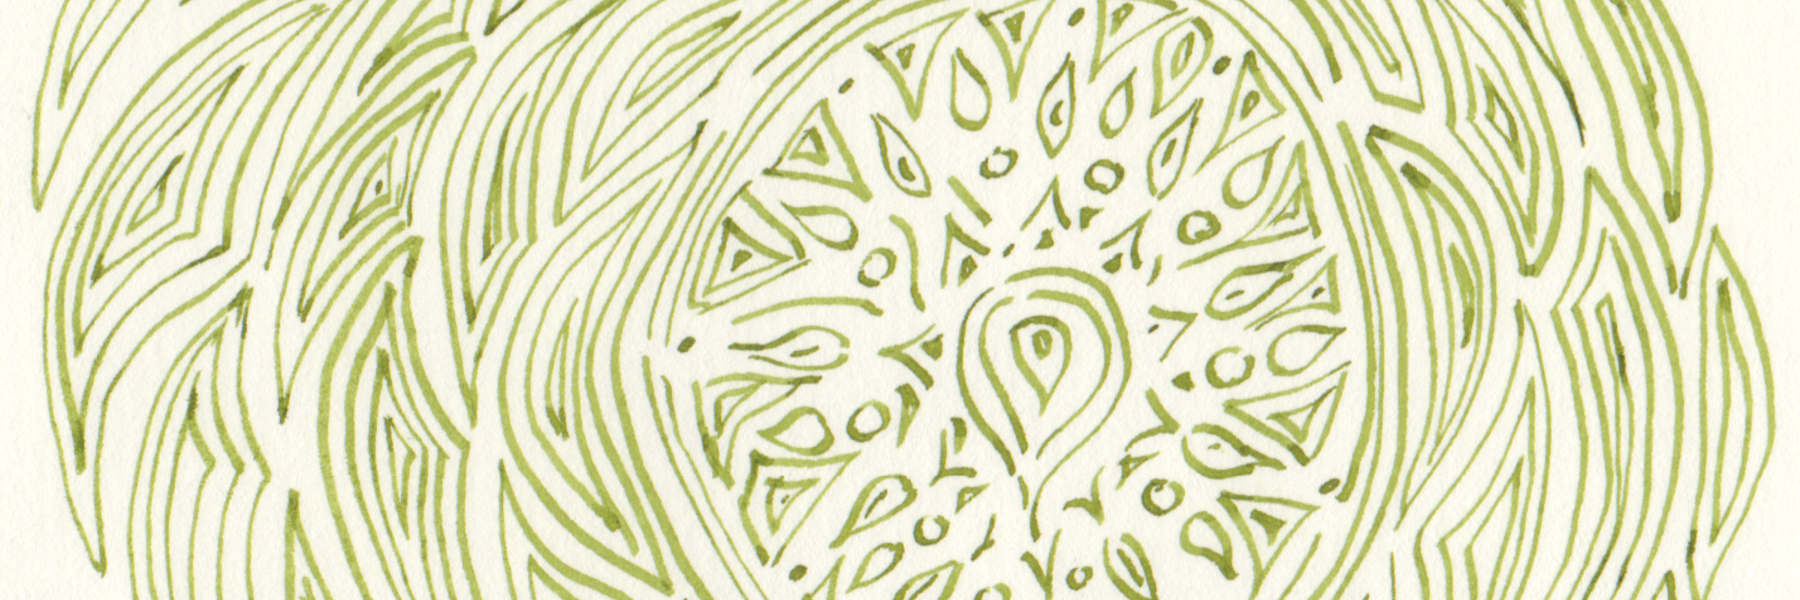 Green ink on paper drawing of abstract swirls.